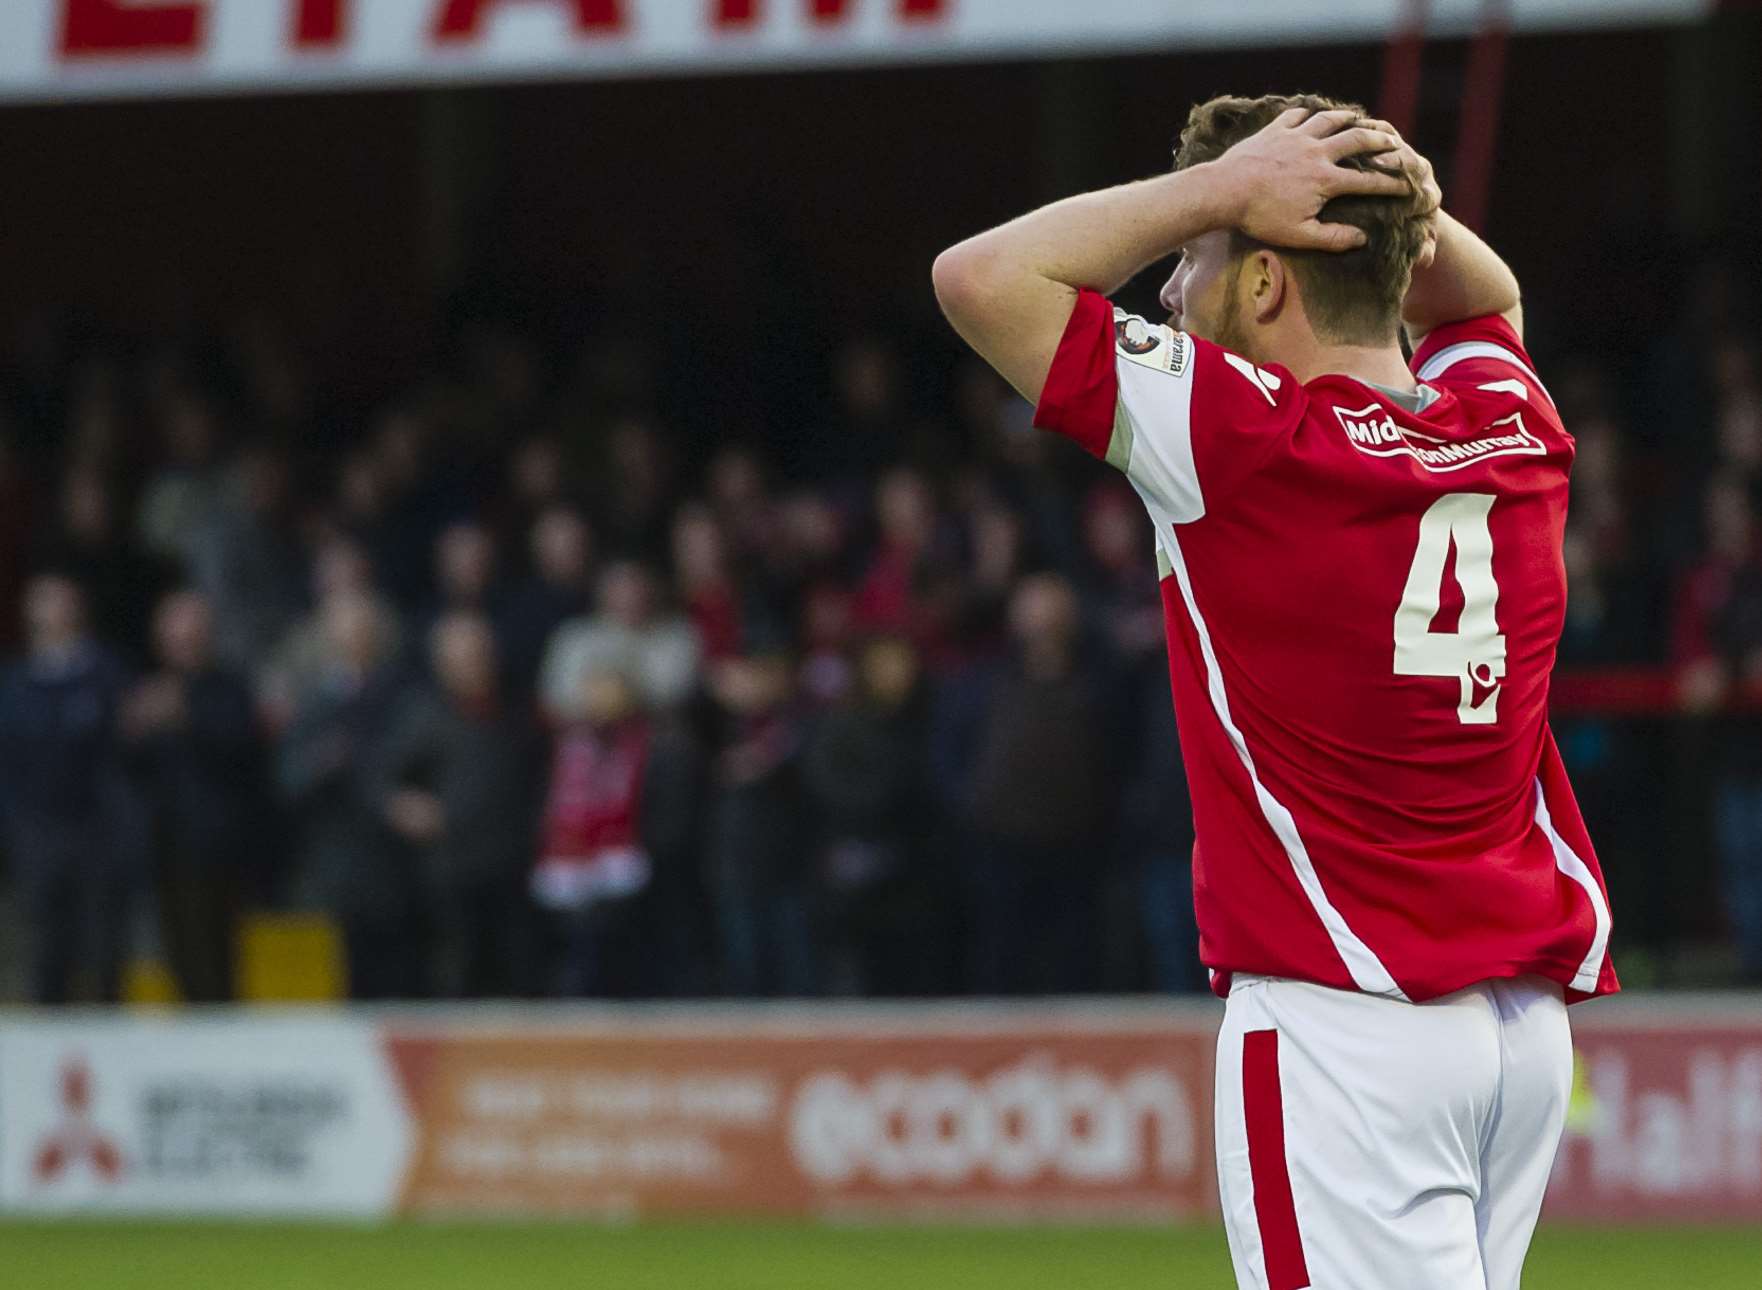 Head in hands for John Paul Kissock as Ebbsfleet miss another chance Picture: Andy Payton